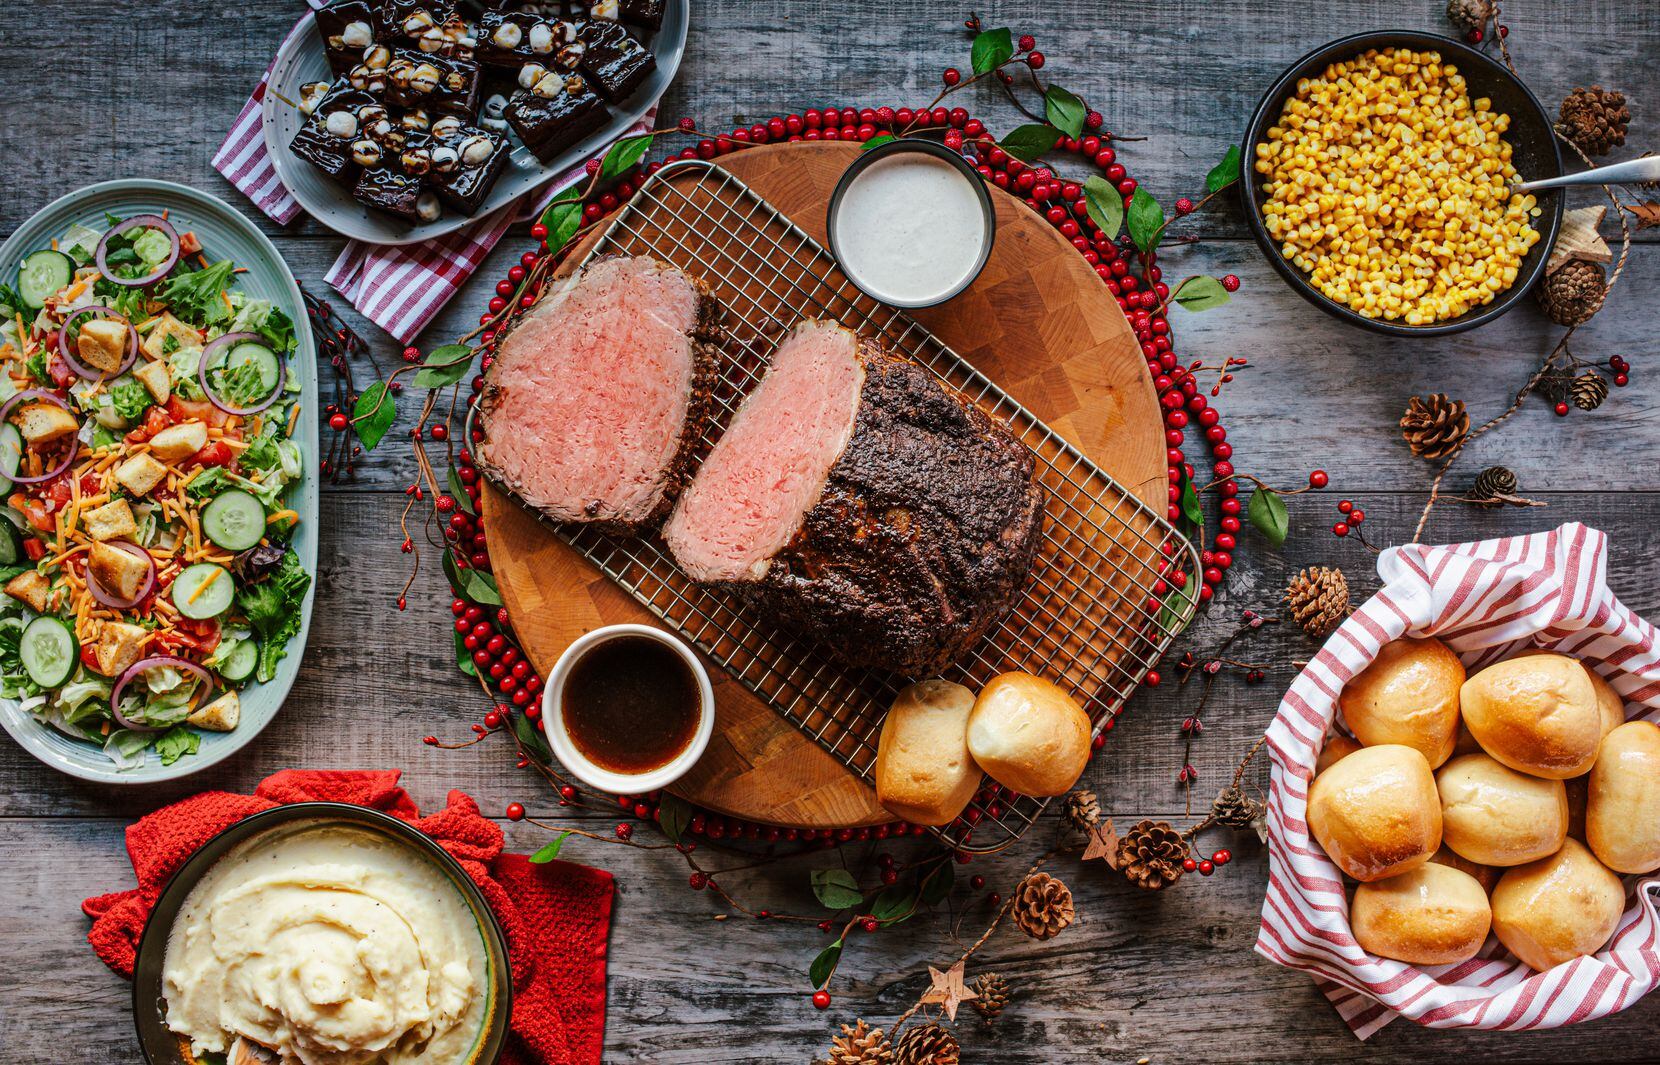 Logan's Roadhouse offers a holiday takeout package that includes a 4-pound prime rib, salad,...